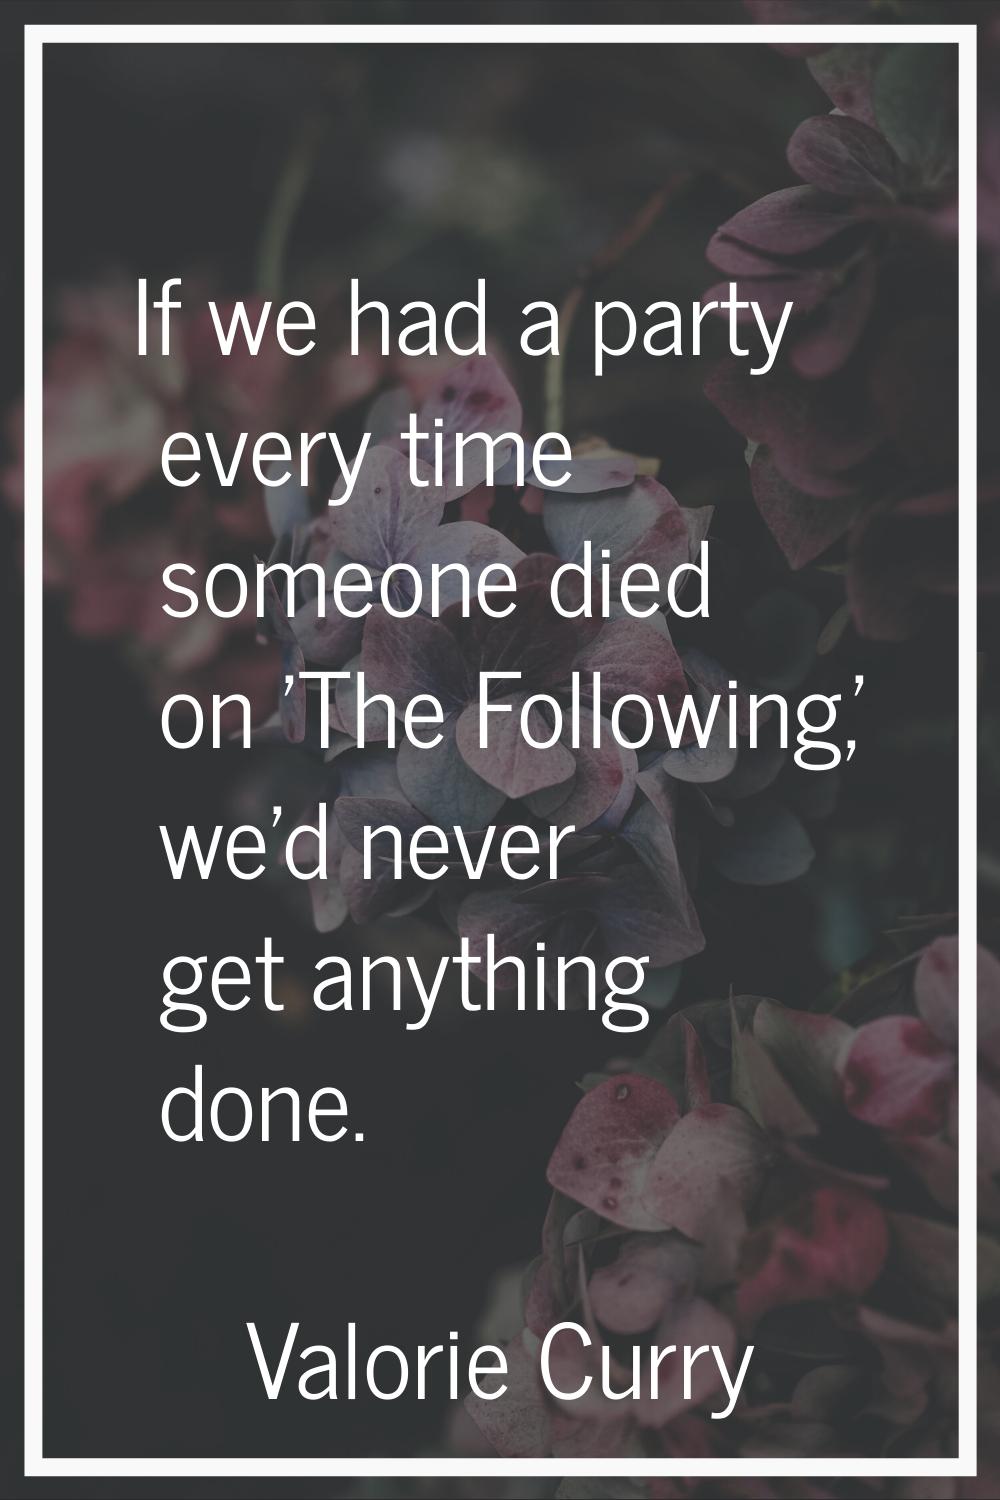 If we had a party every time someone died on 'The Following,' we'd never get anything done.